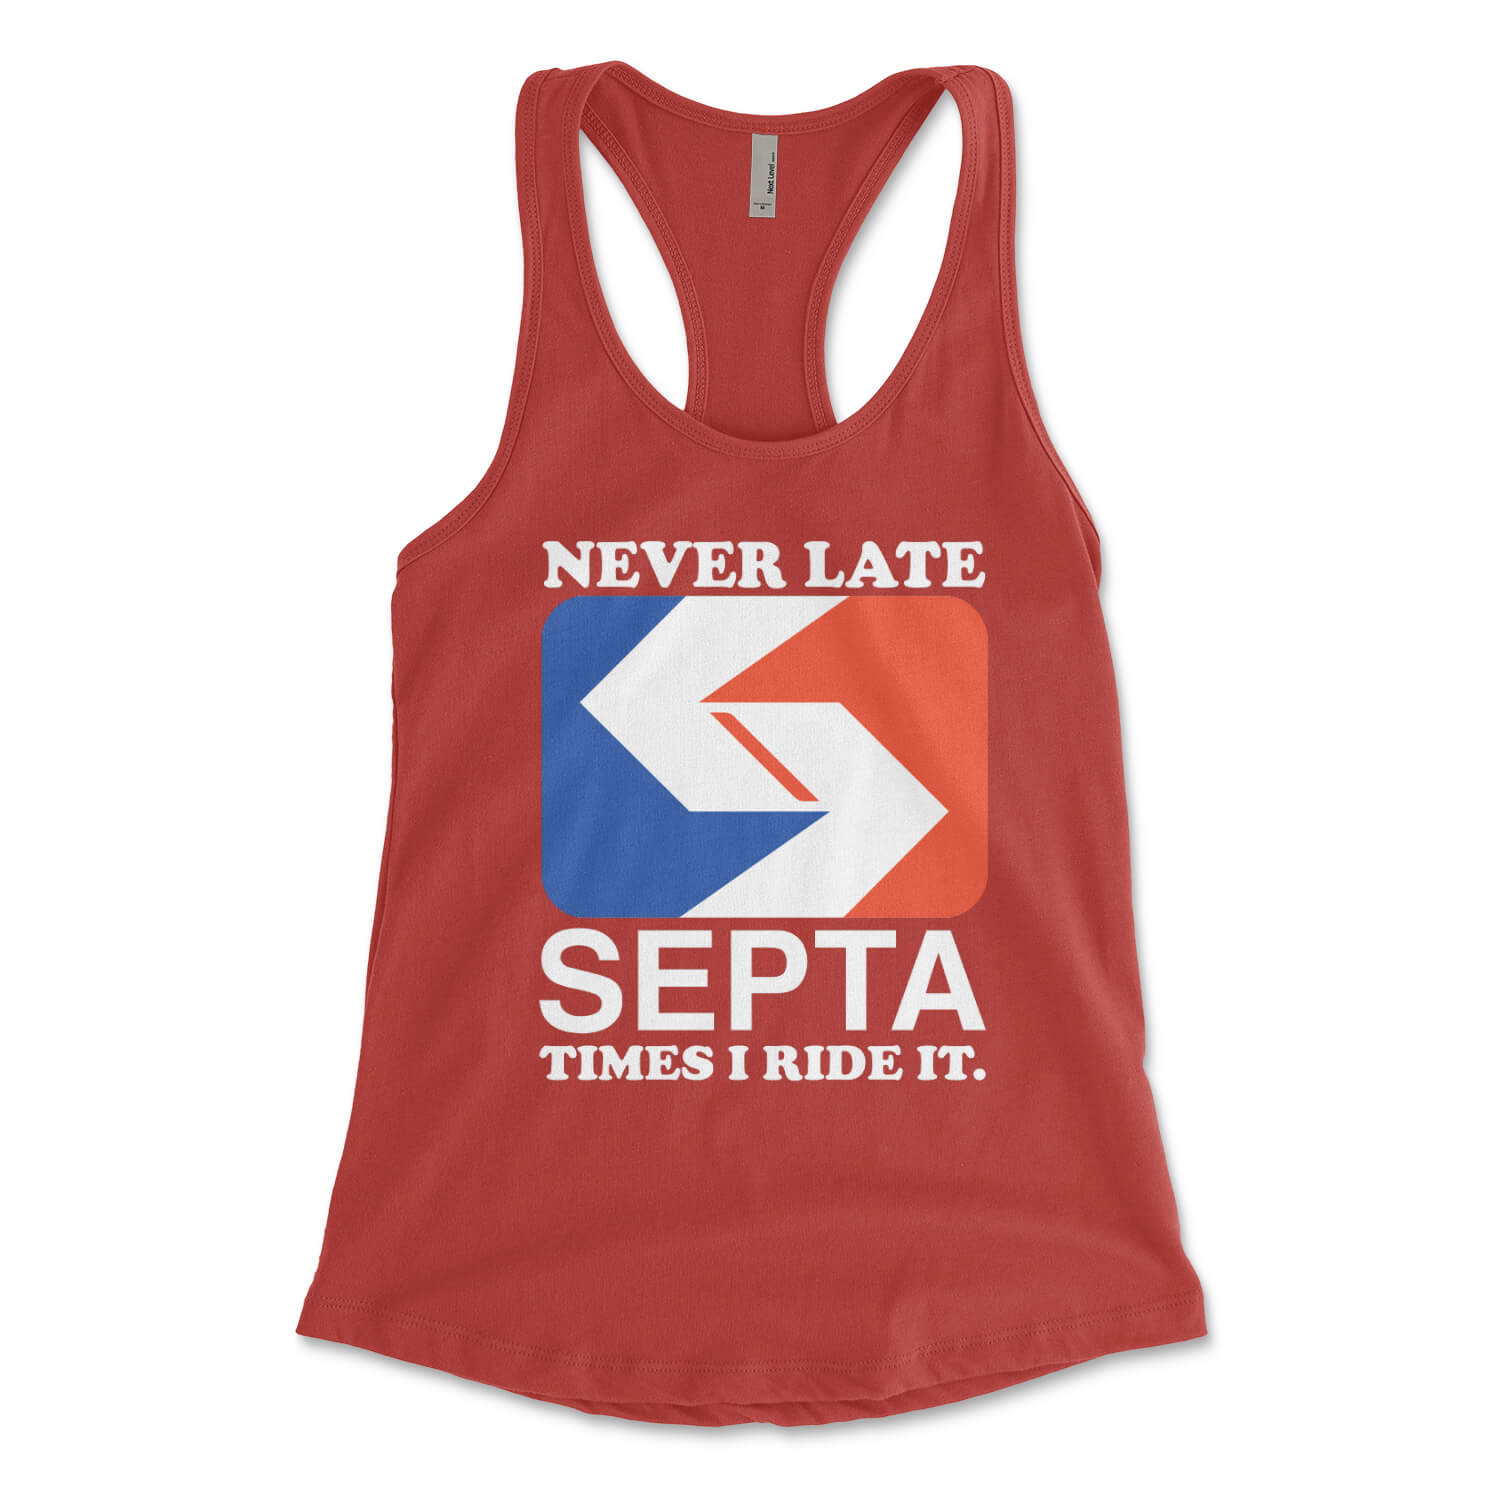 Funny Septa Philadelphia womens red racerback tank top from Phillygoat